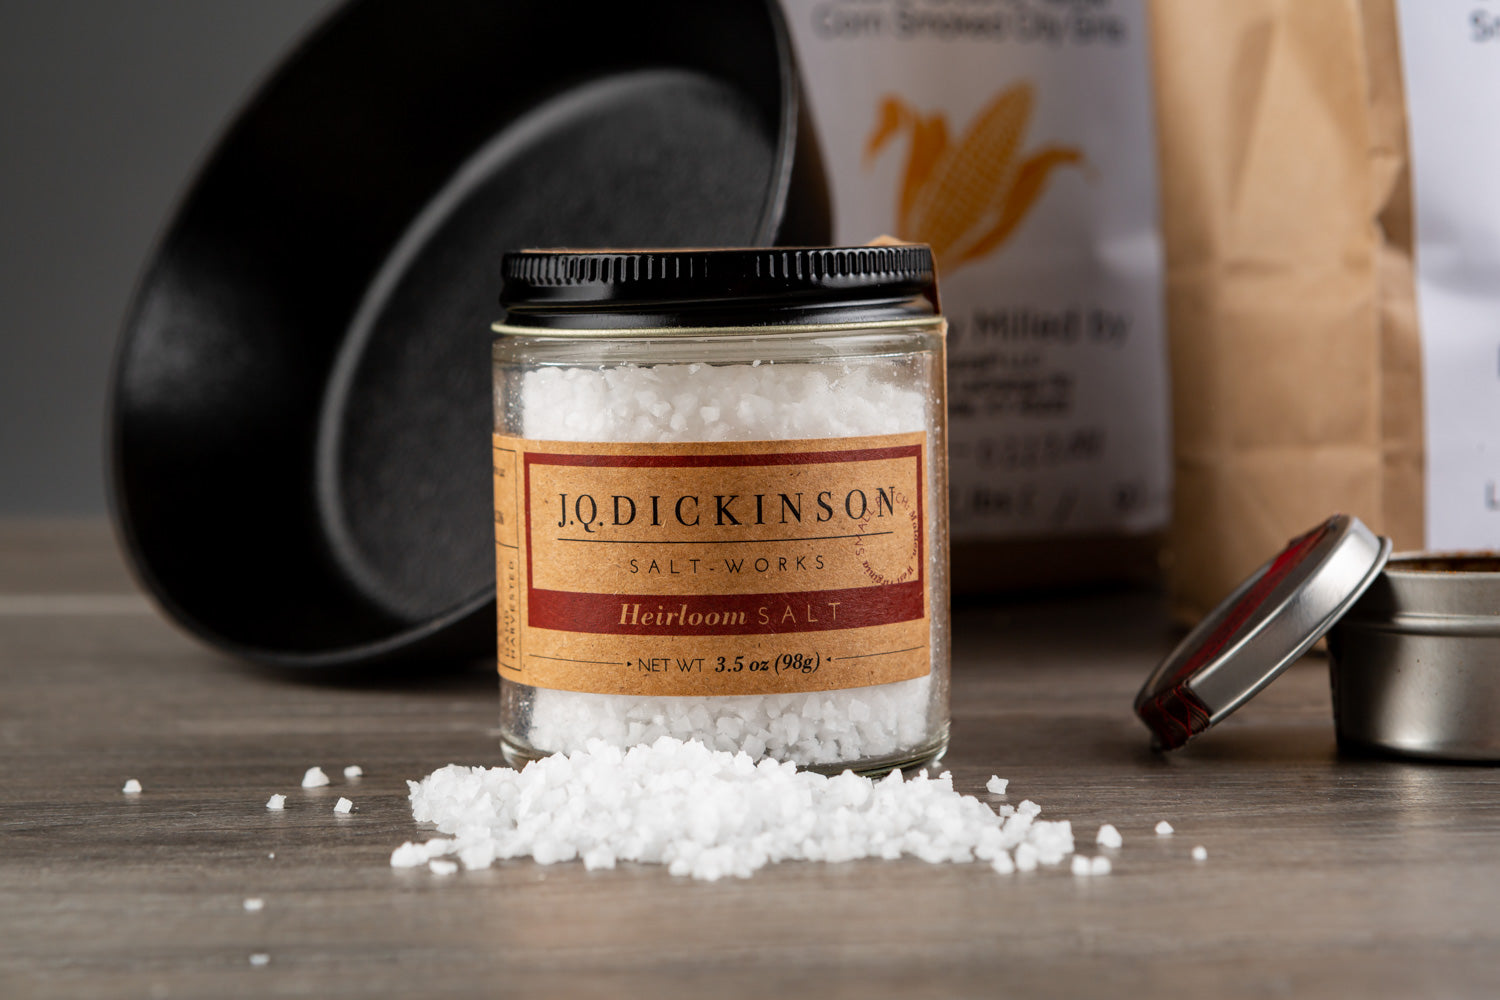 Stock Up on Handcrafted Southern Cooking Essentials